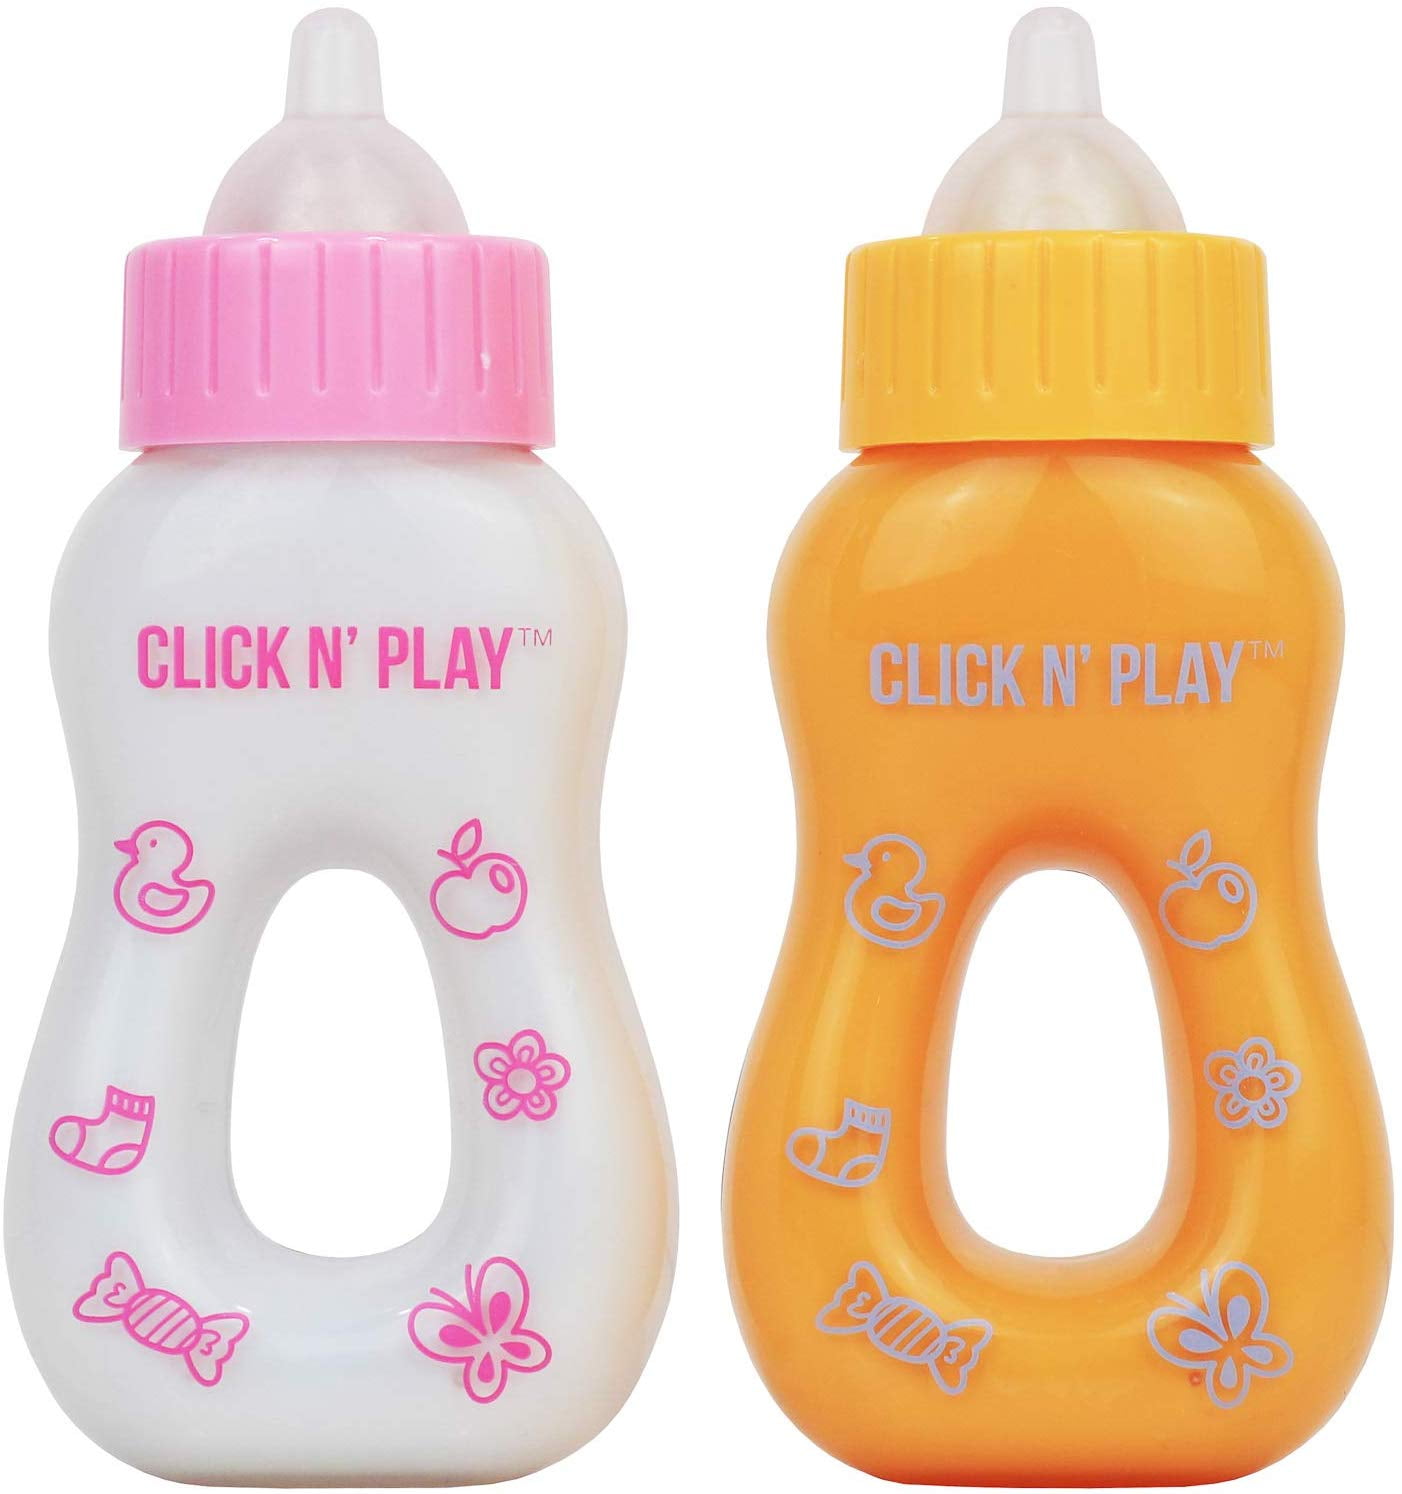 Details about   Baby Disappearing Magic Bottles Includes 1 Milk 1 Juice Bottle With Pacifier NEW 